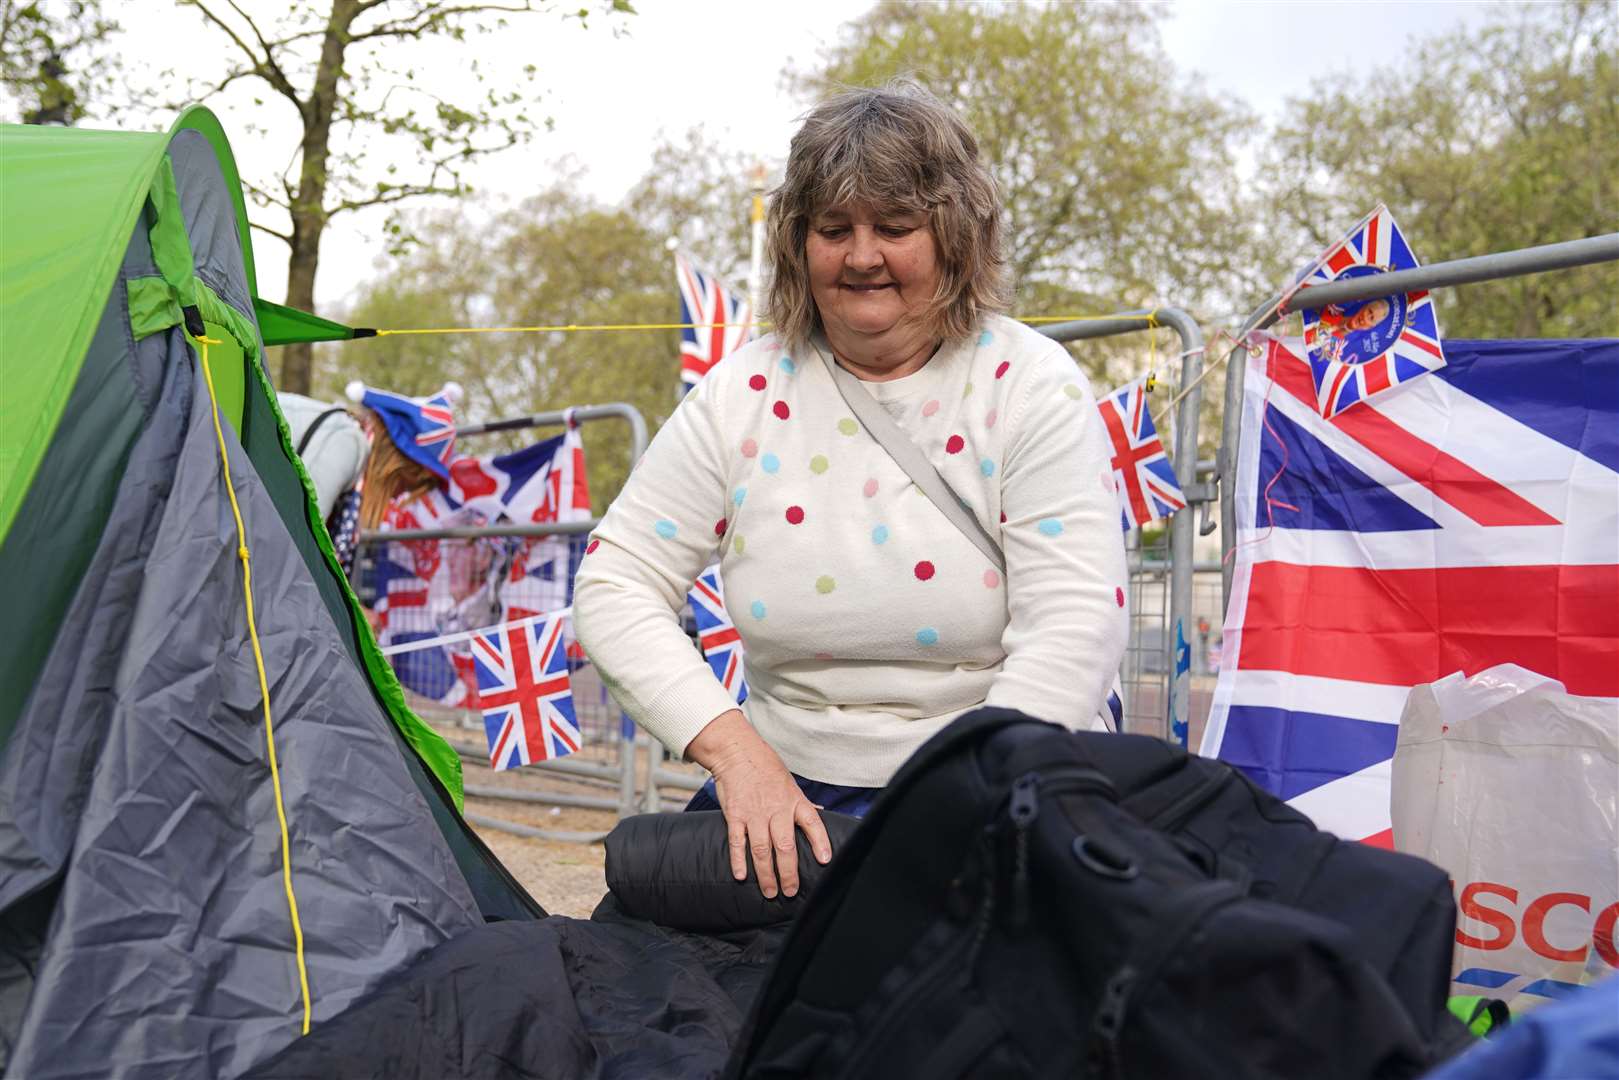 Kim Bilson, from Poole in Dorset, who is already in position along The Mall in central London ahead of the coronation (James Manning/PA)